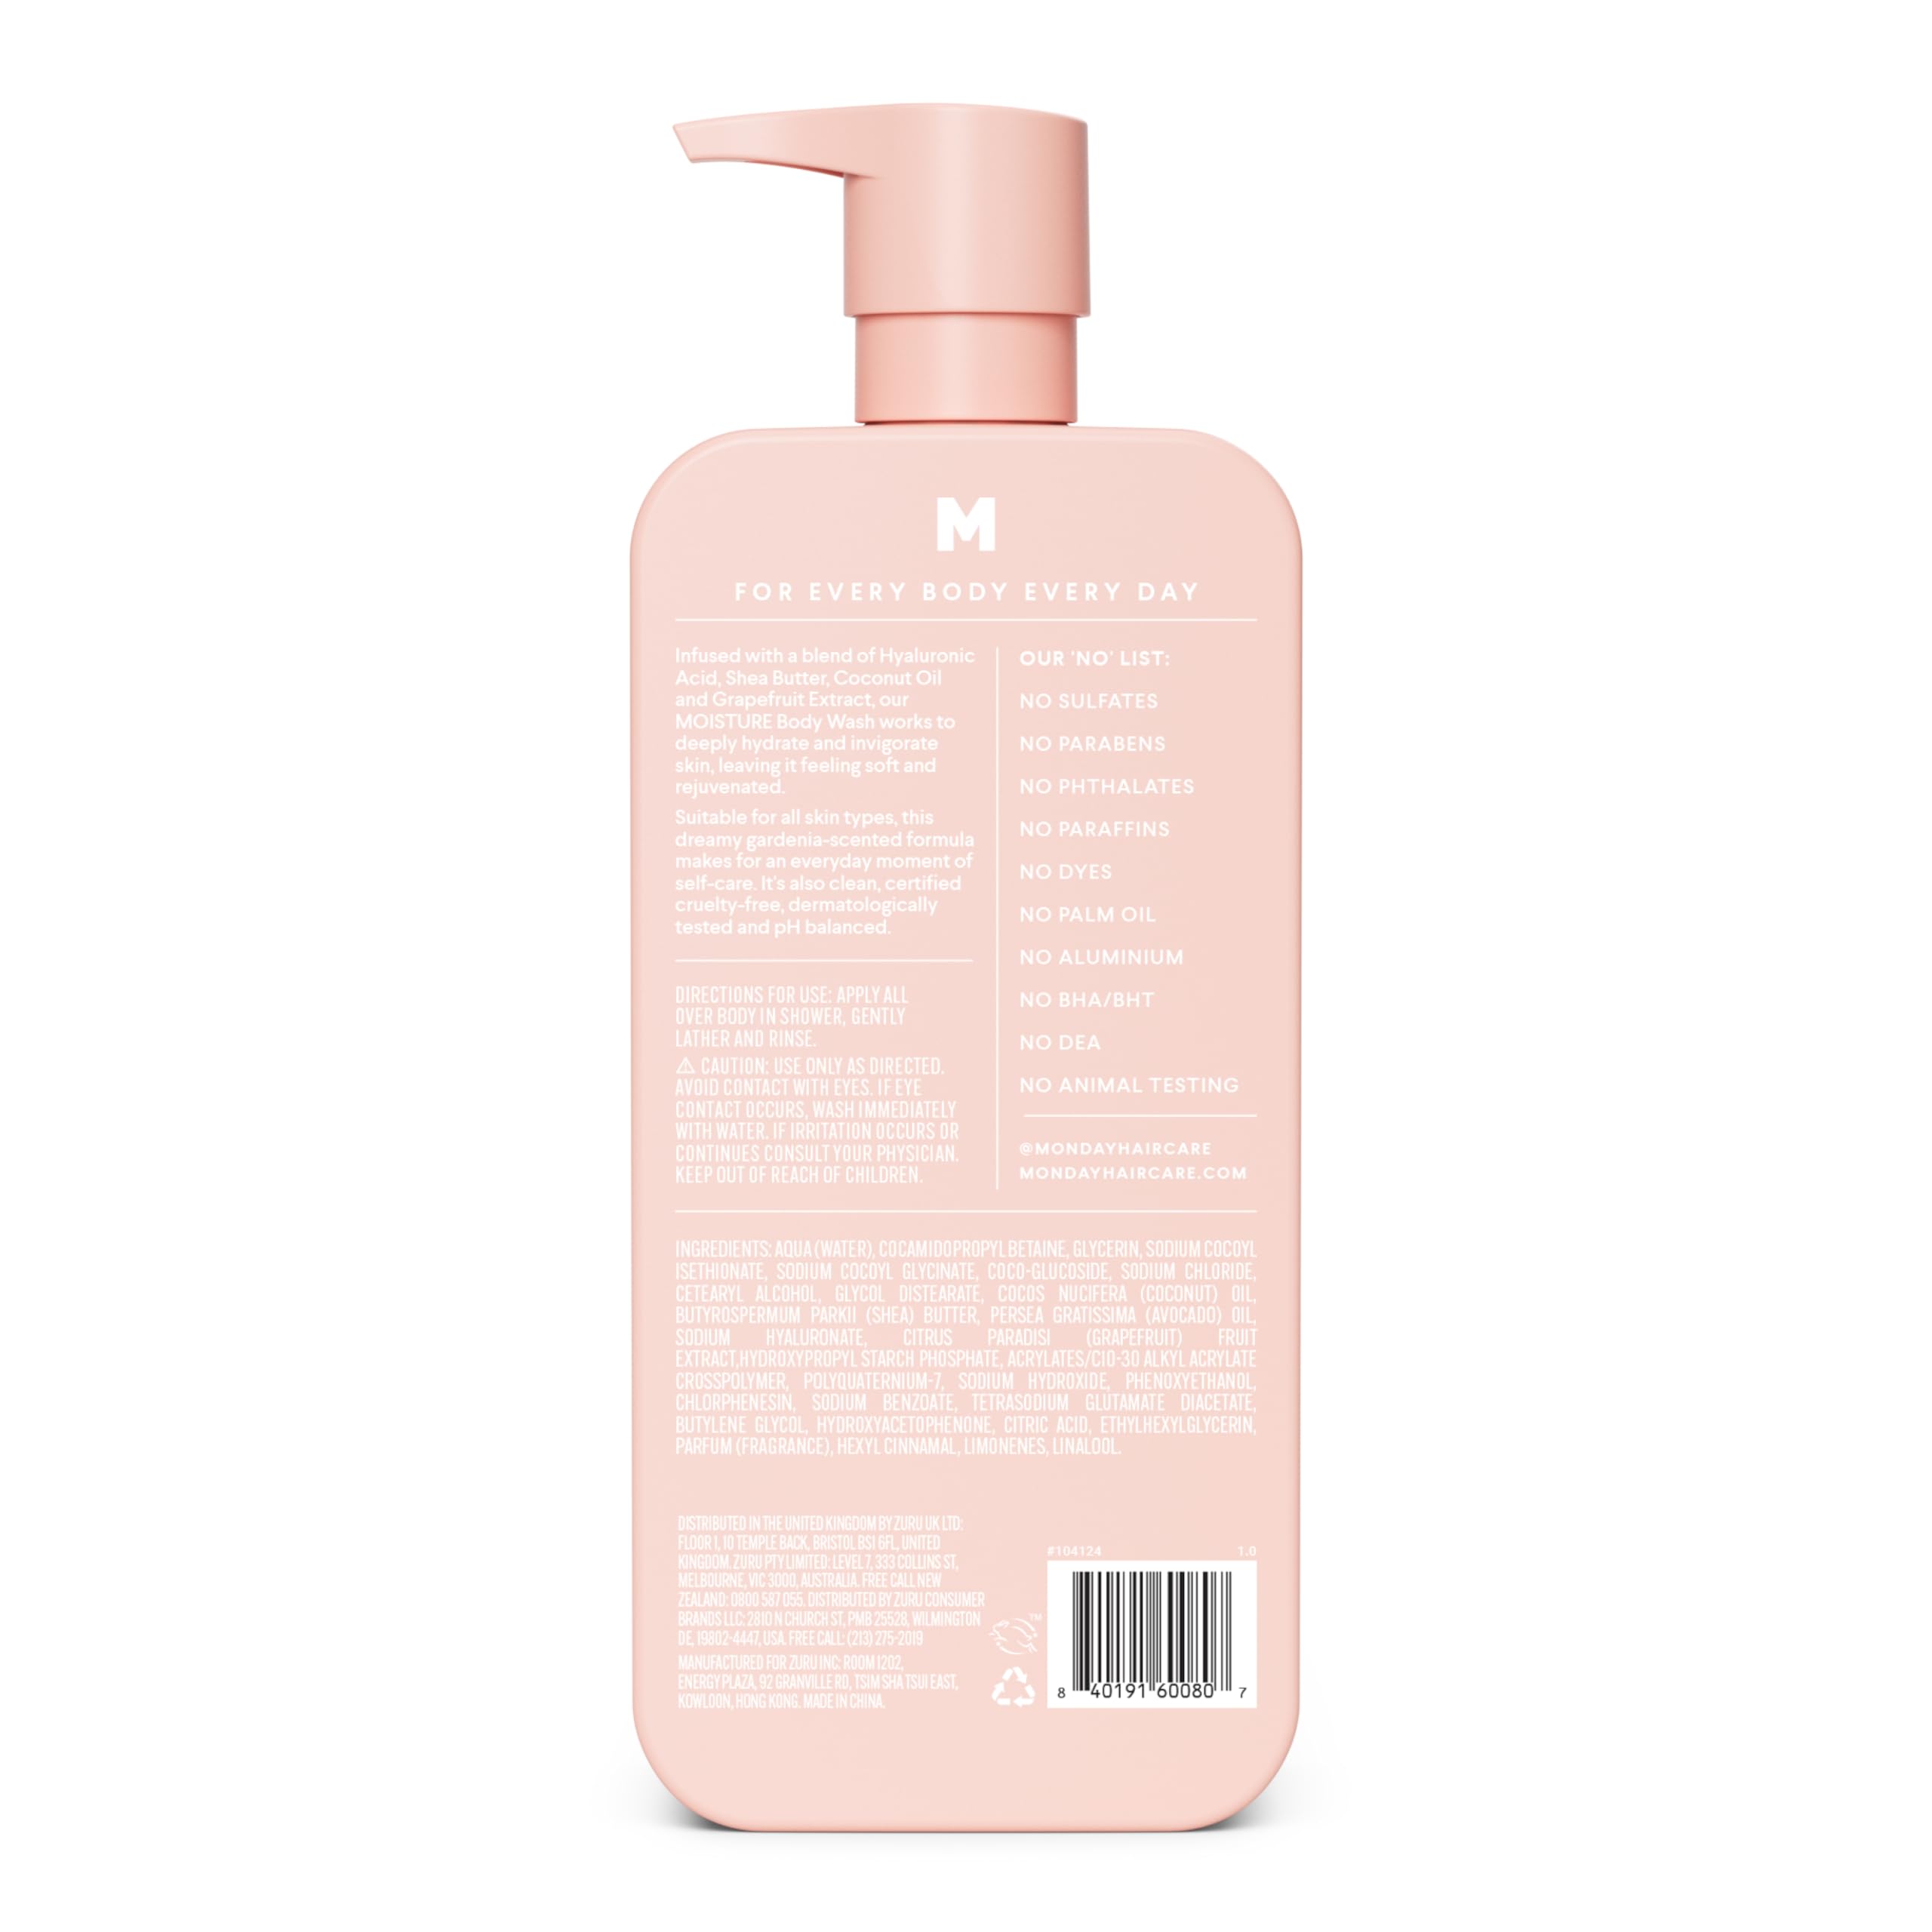 MONDAY HAIRCARE Moisture Body Wash 27oz - Nourishing Ingredients, Shea Butter, Coconut Oil and Grapefruit Extract, Hyrdrate and Replenish Skin